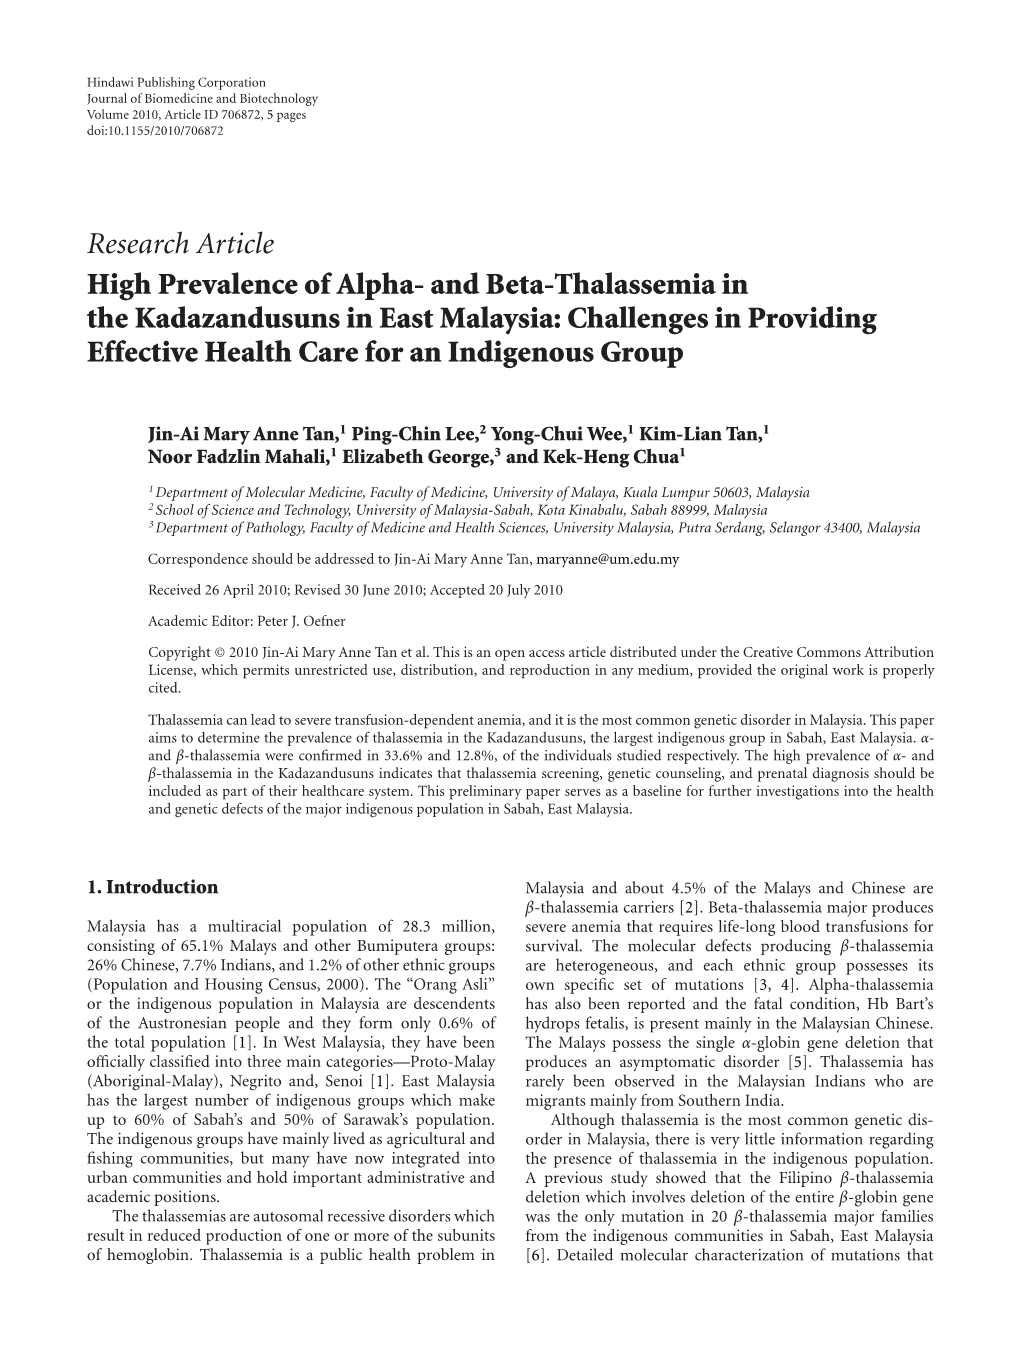 Research Article High Prevalence of Alpha- and Beta-Thalassemia in the Kadazandusuns in East Malaysia